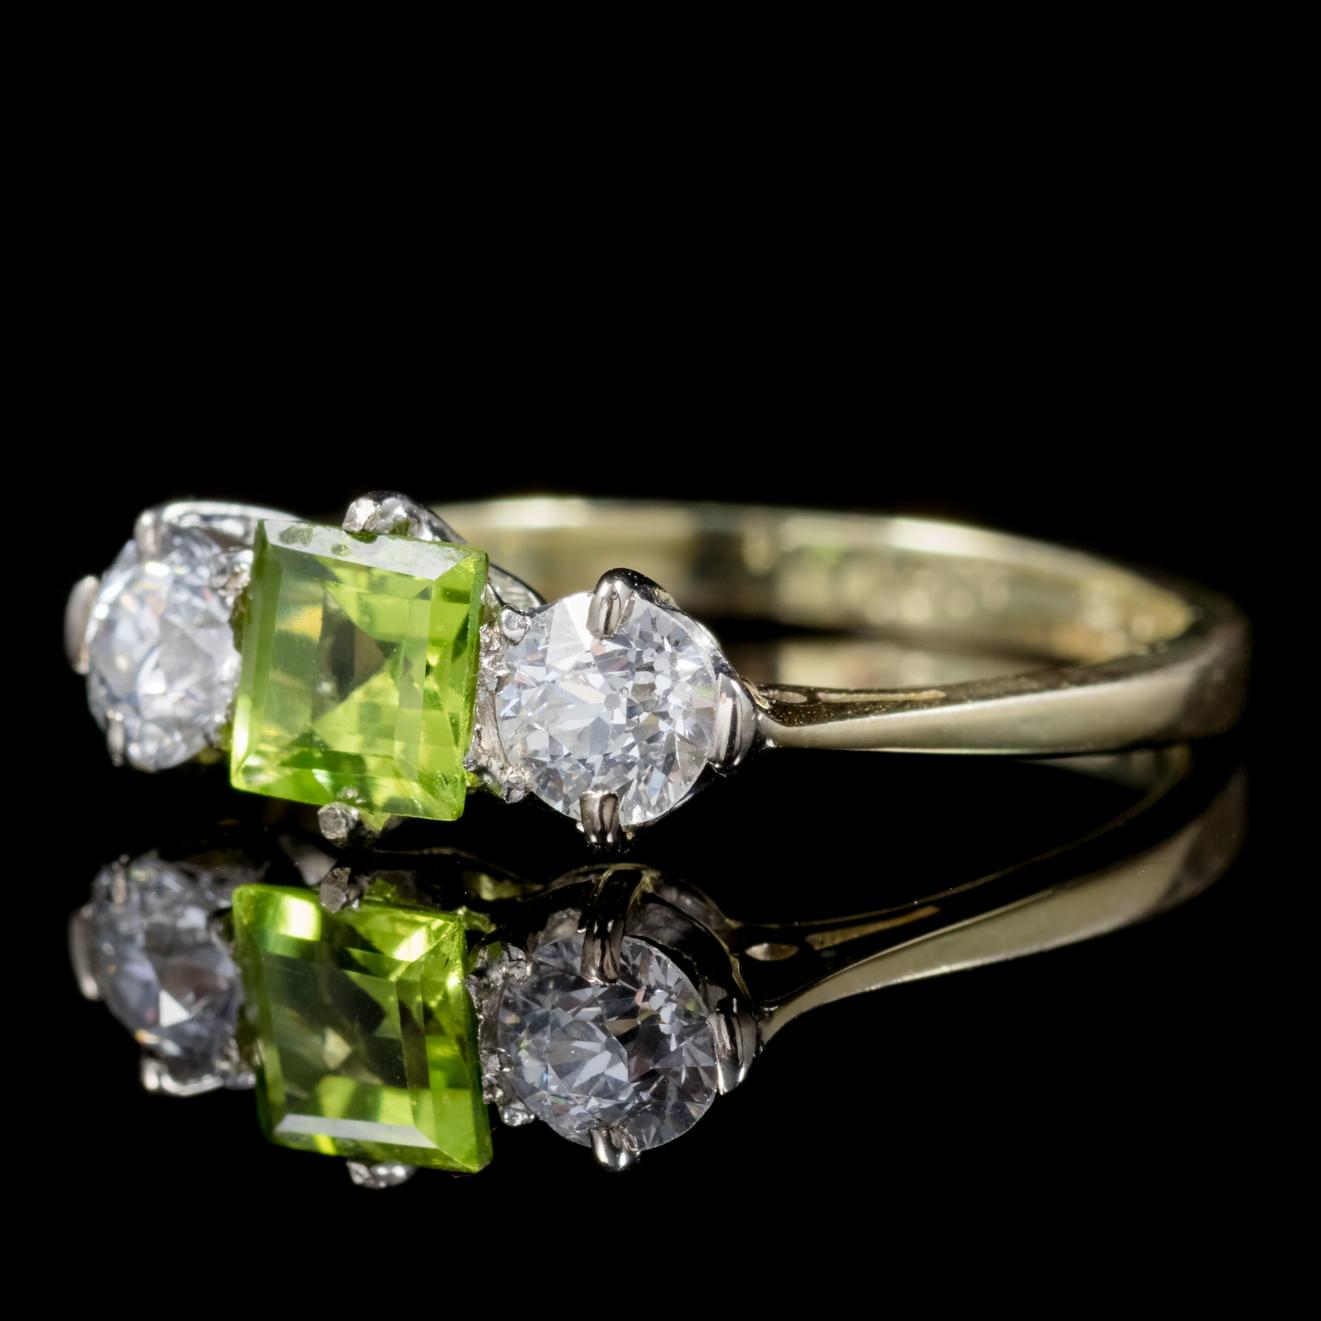 A fabulous antique Edwardian trilogy ring C. 1915, adorned with a beautiful light green 0.60ct Princess cut Peridot flanked by two 0.15ct old cut Diamonds. 

The Peridot is a stone of lightness and beauty and was believed to be a stone of springtime